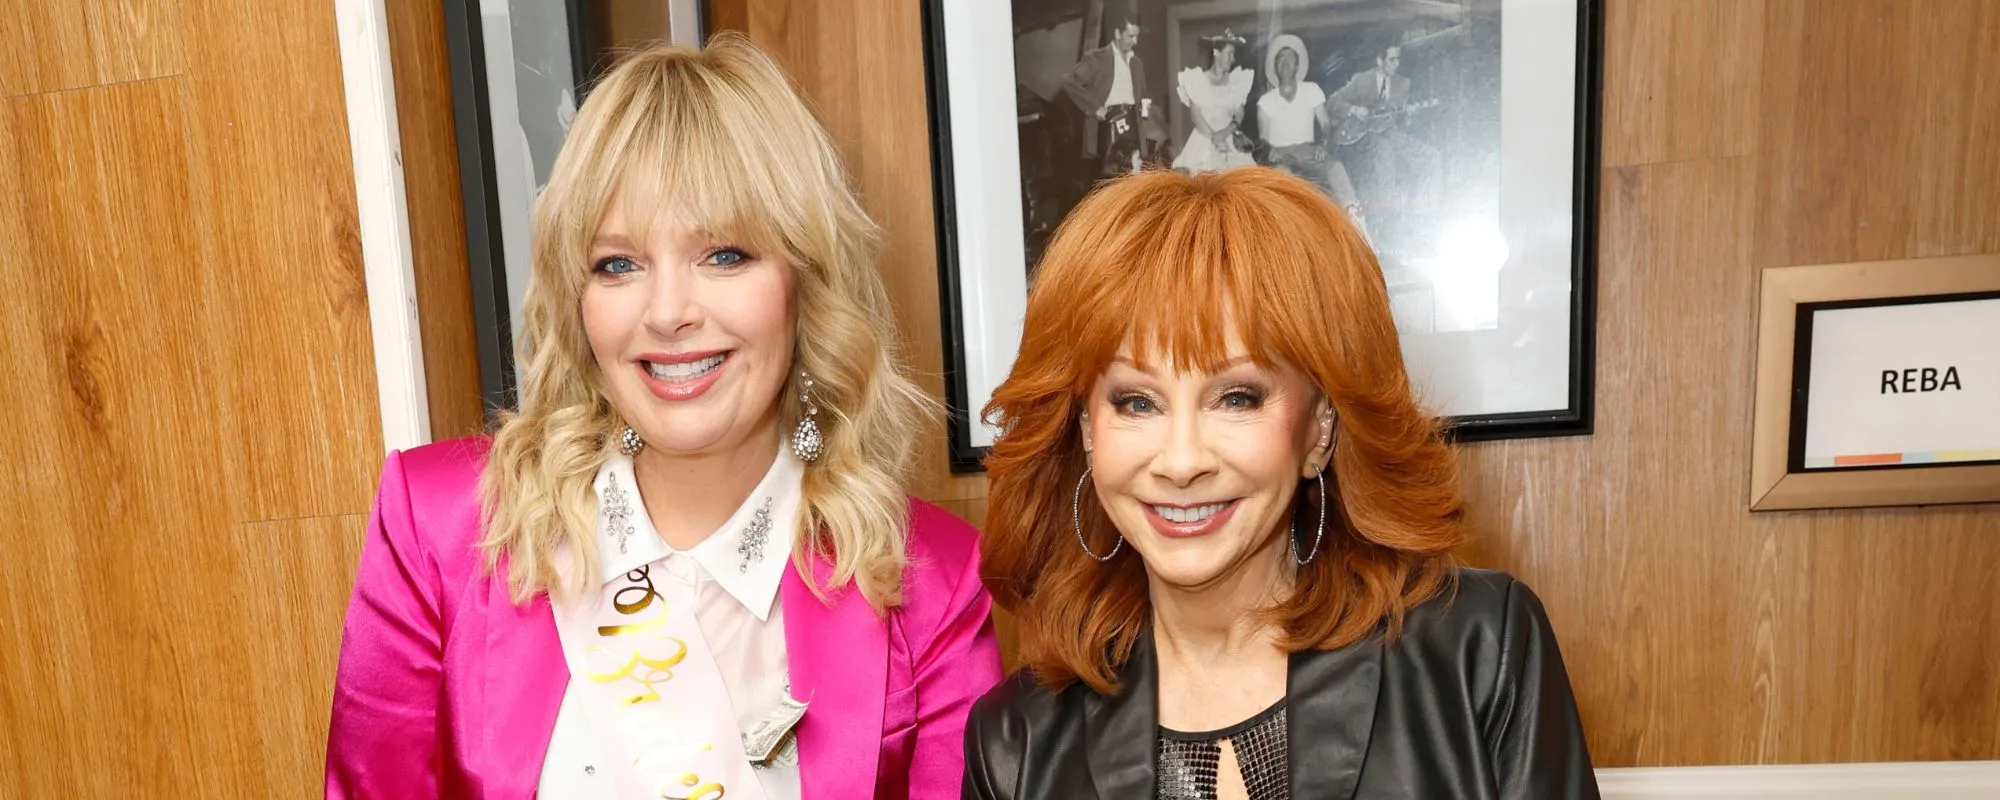 Will Reba McEntire Return to ‘Young Sheldon’ Before The Show’s Swan Song?